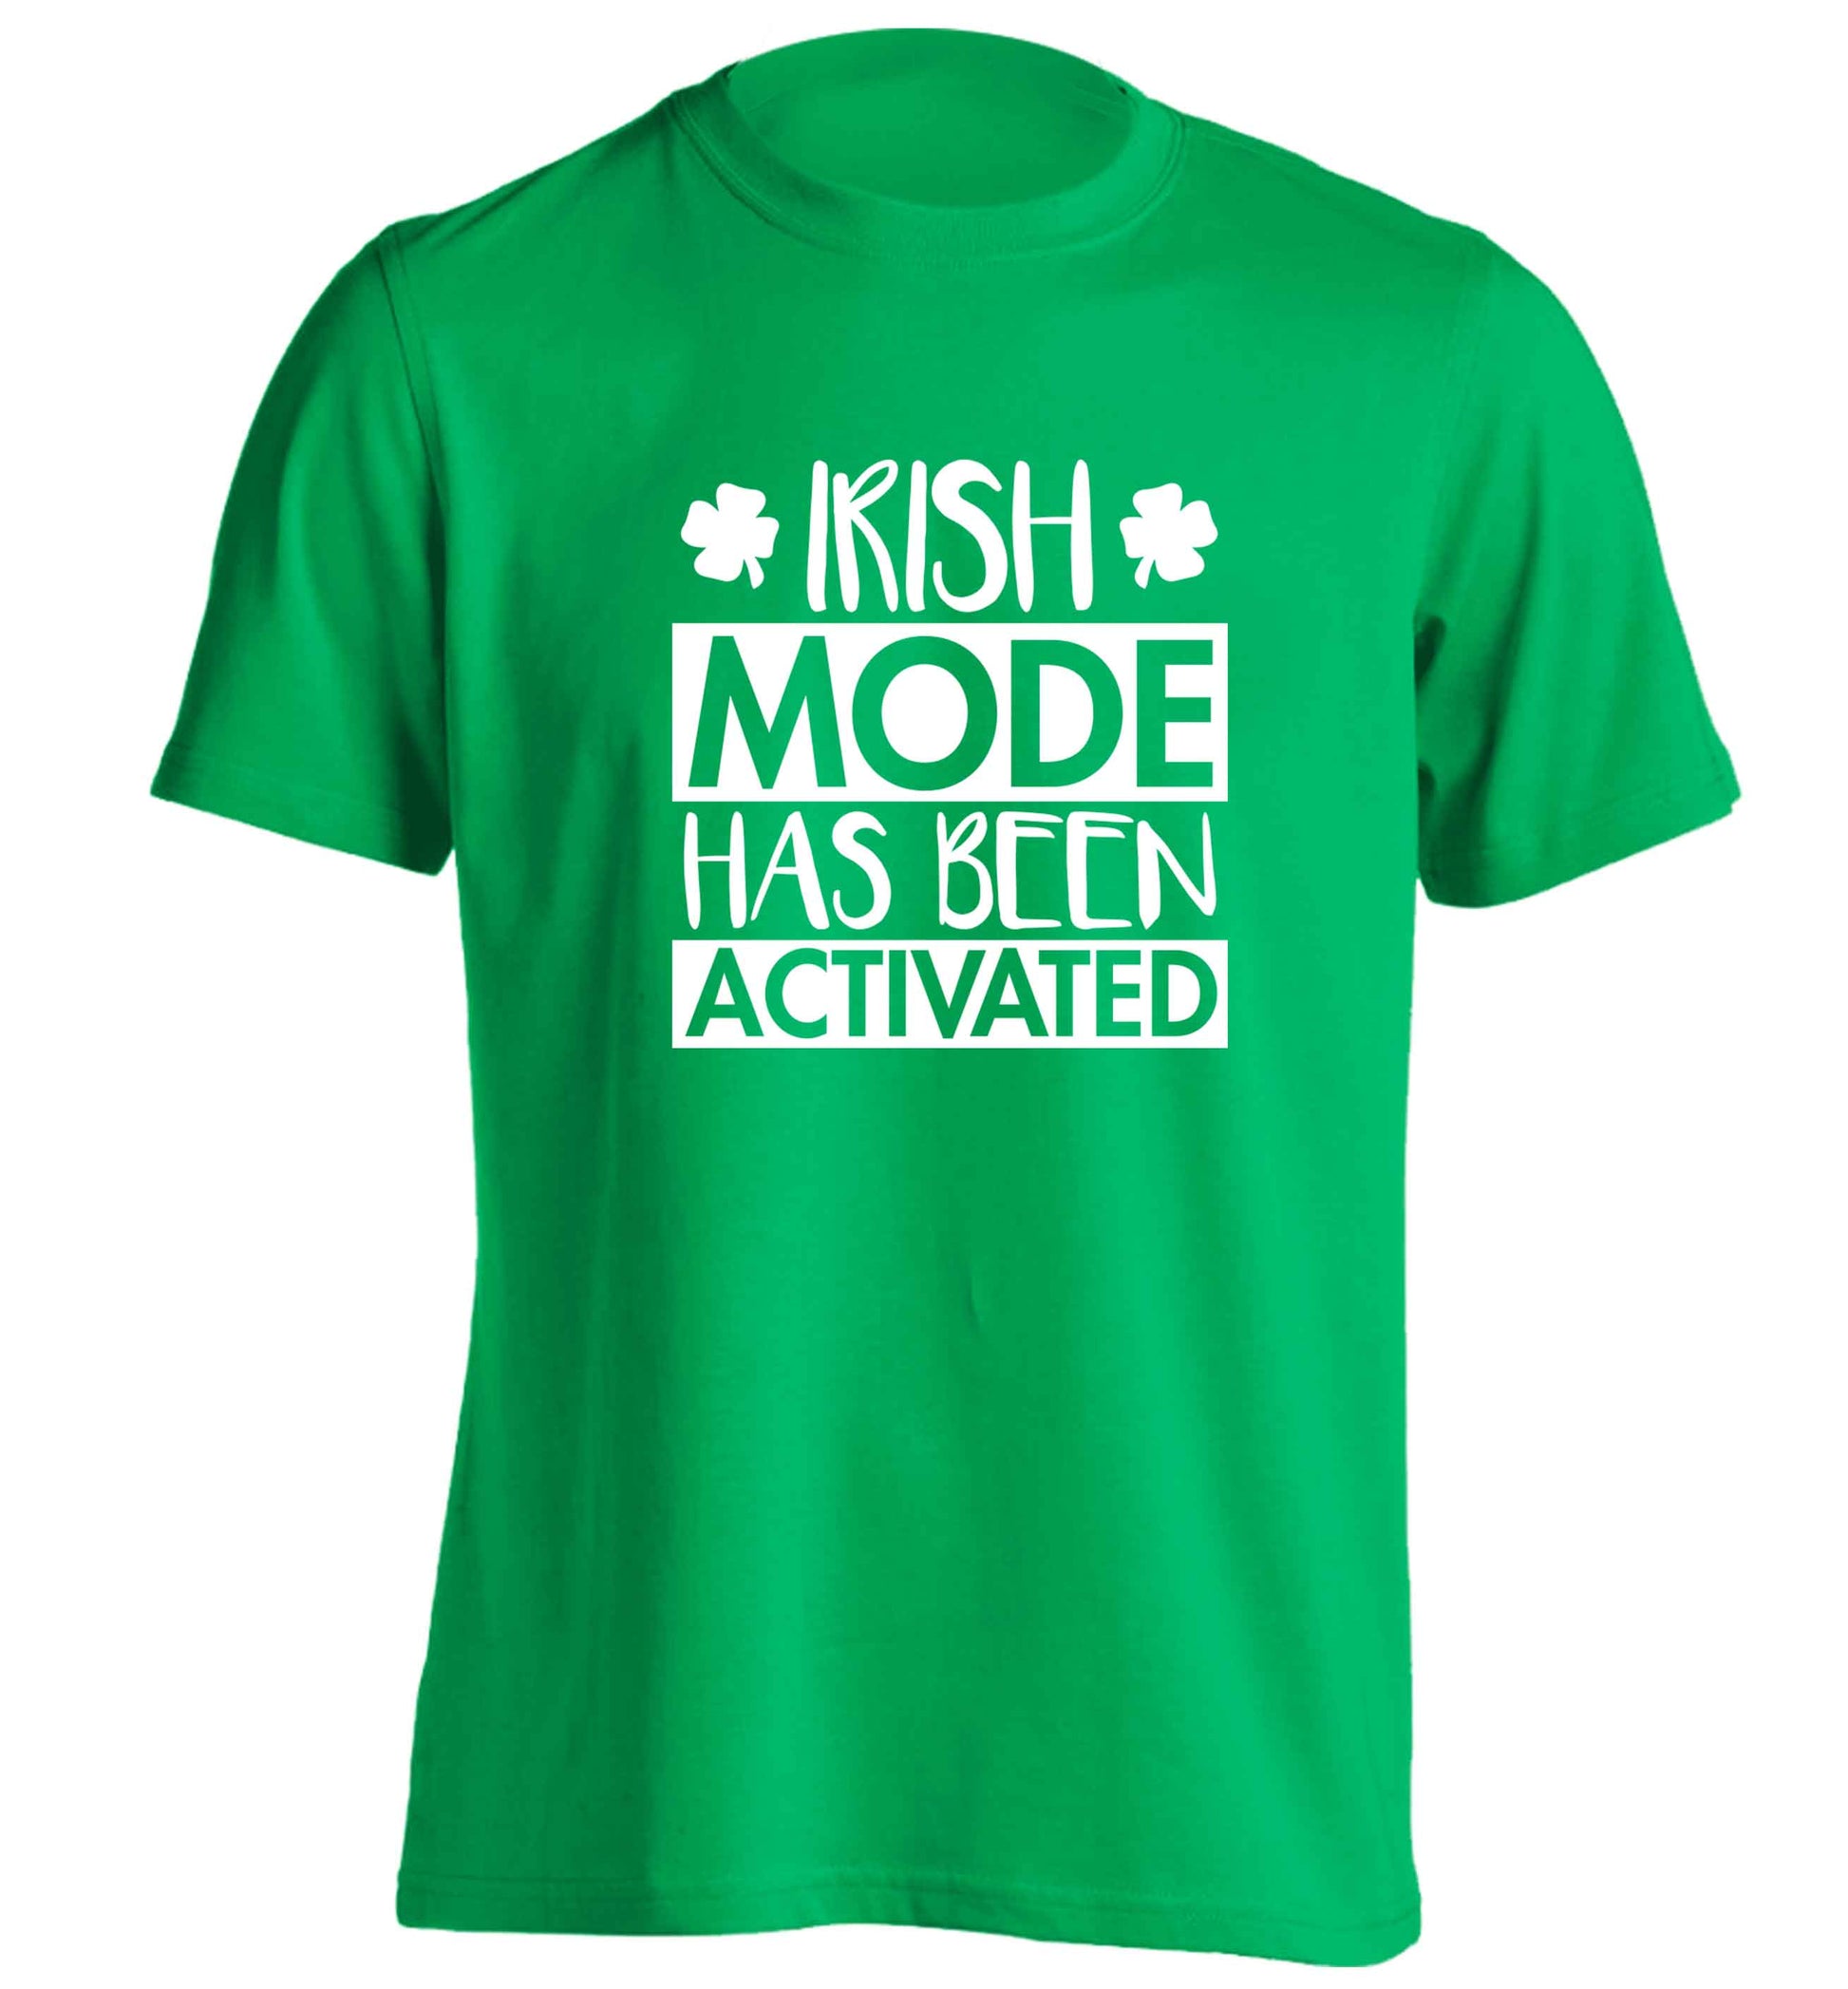 Irish mode has been activated adults unisex green Tshirt 2XL